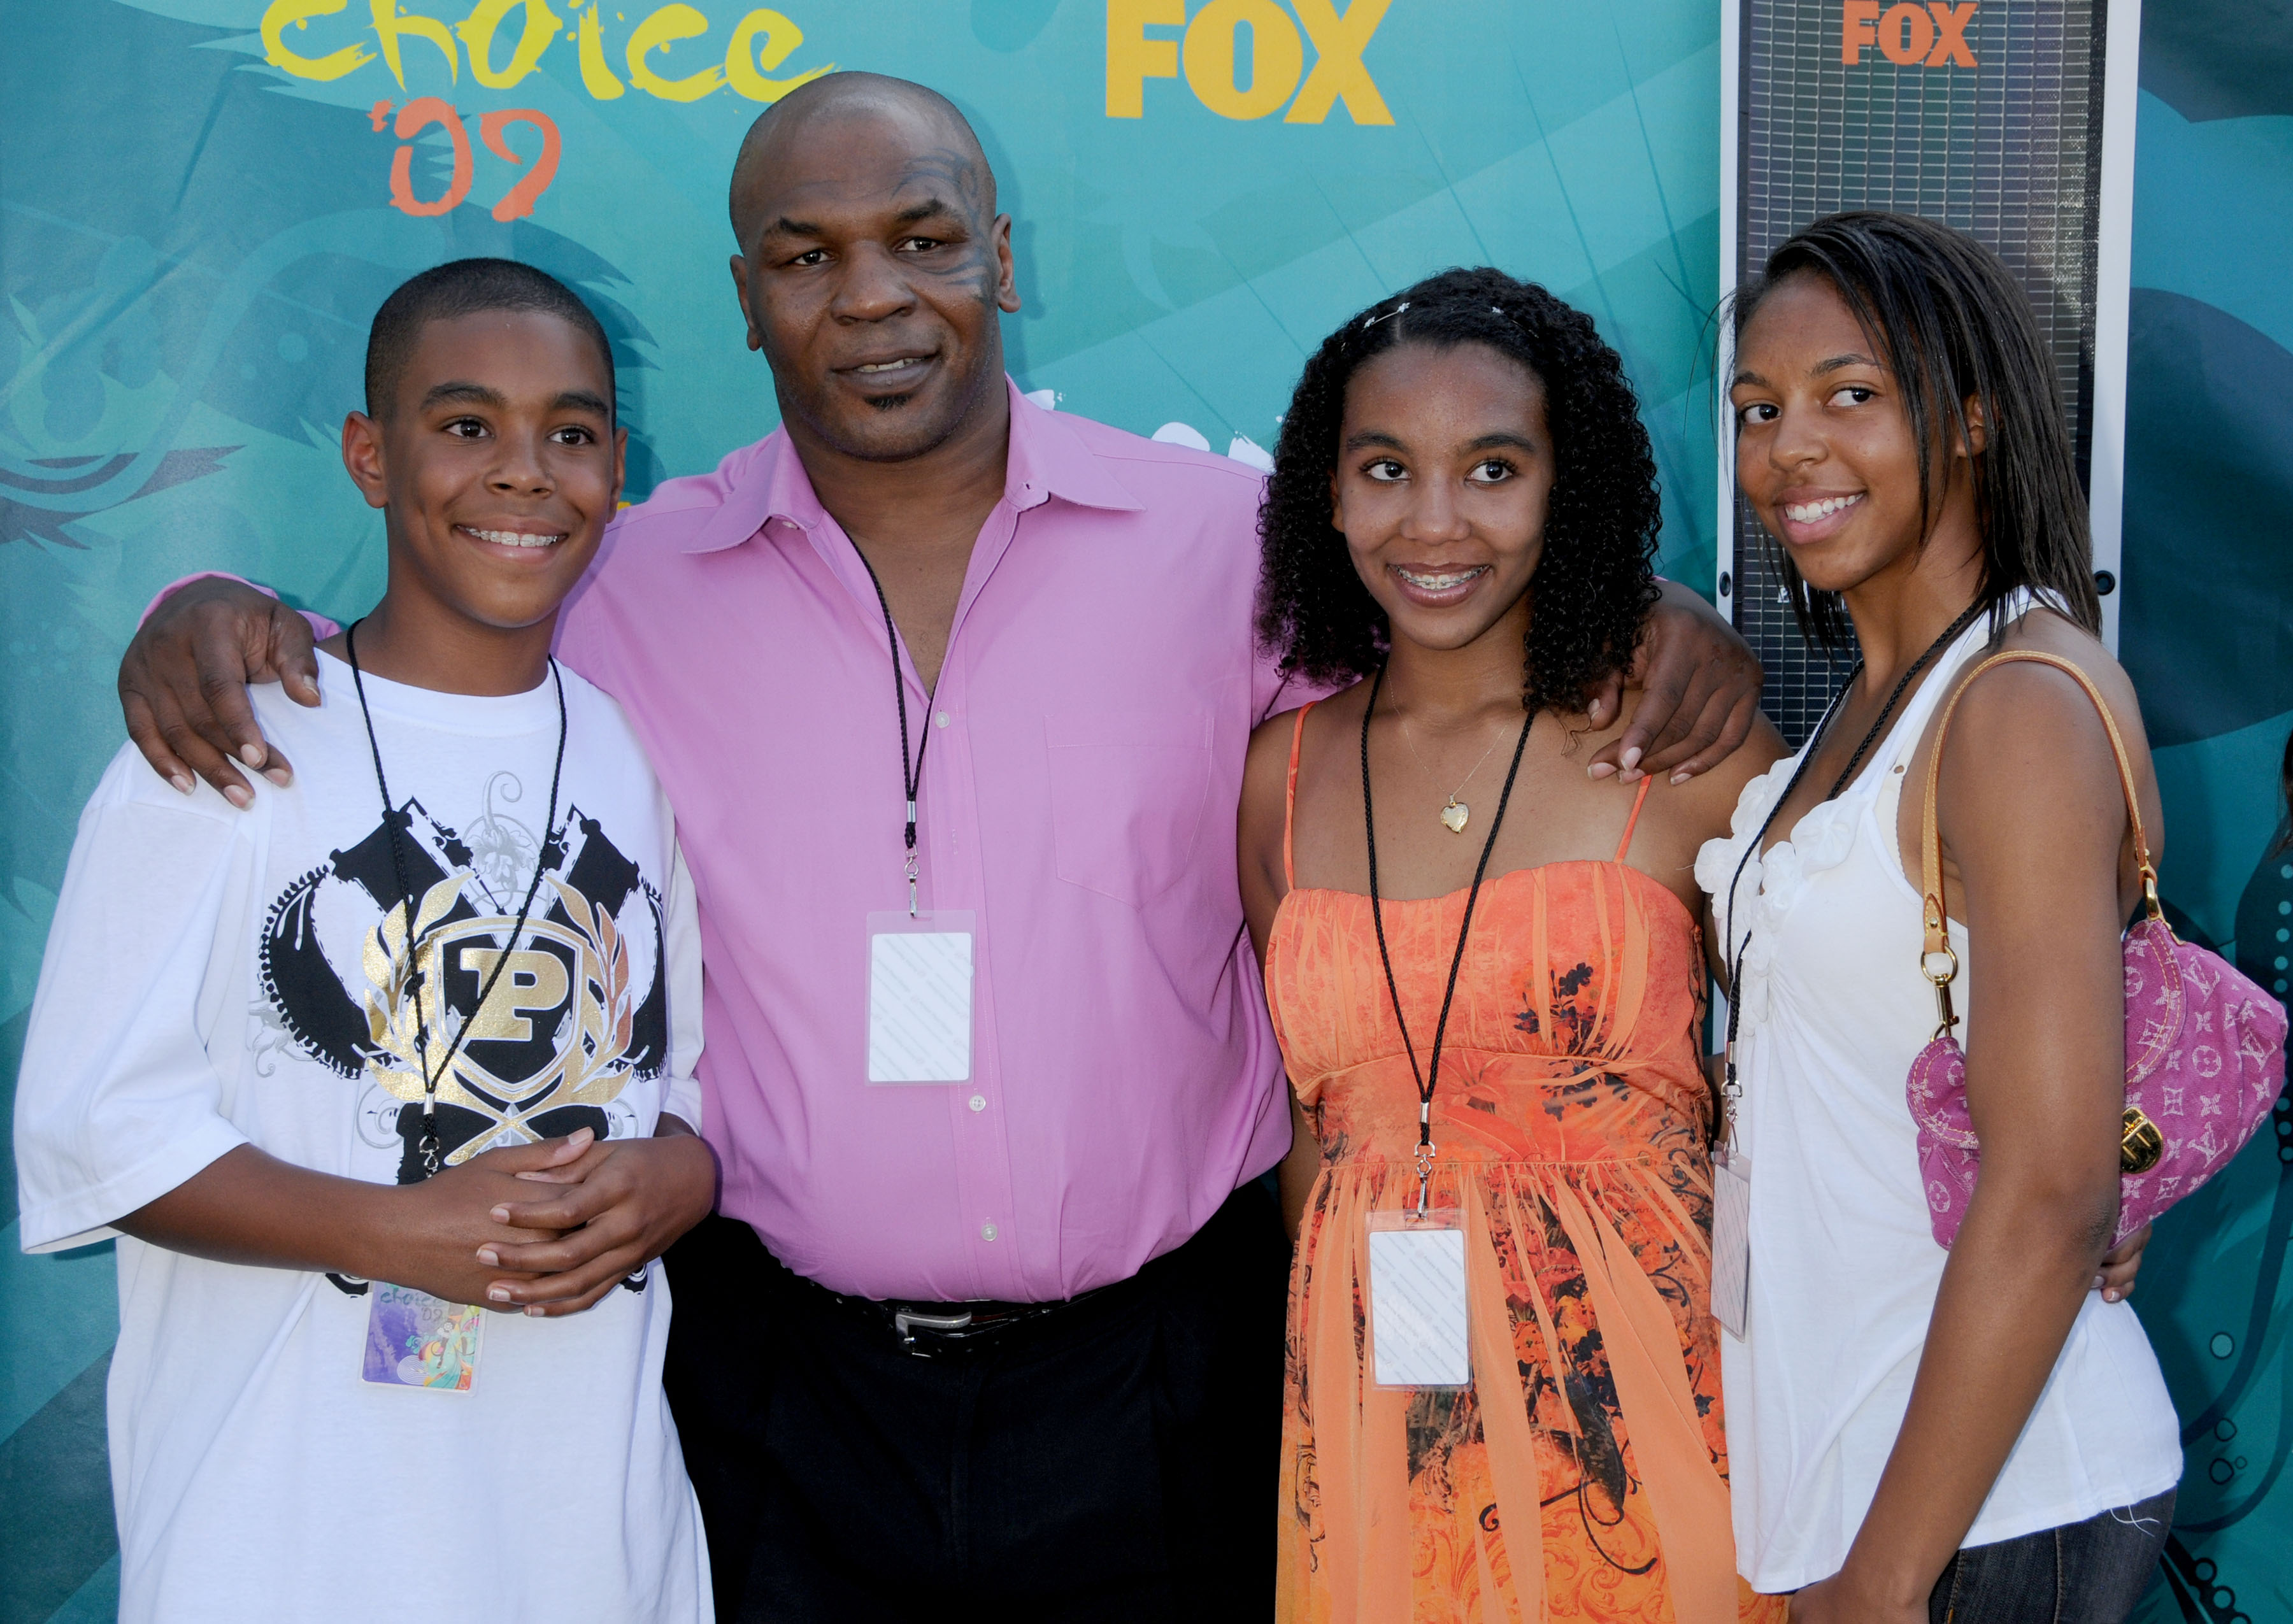 Mike Tyson and his family arriving at The Teen Choice Awards 2009, which took place at the Universal Amphitheater in Universal City, California, on August 9, 2009 | Source: Getty Images